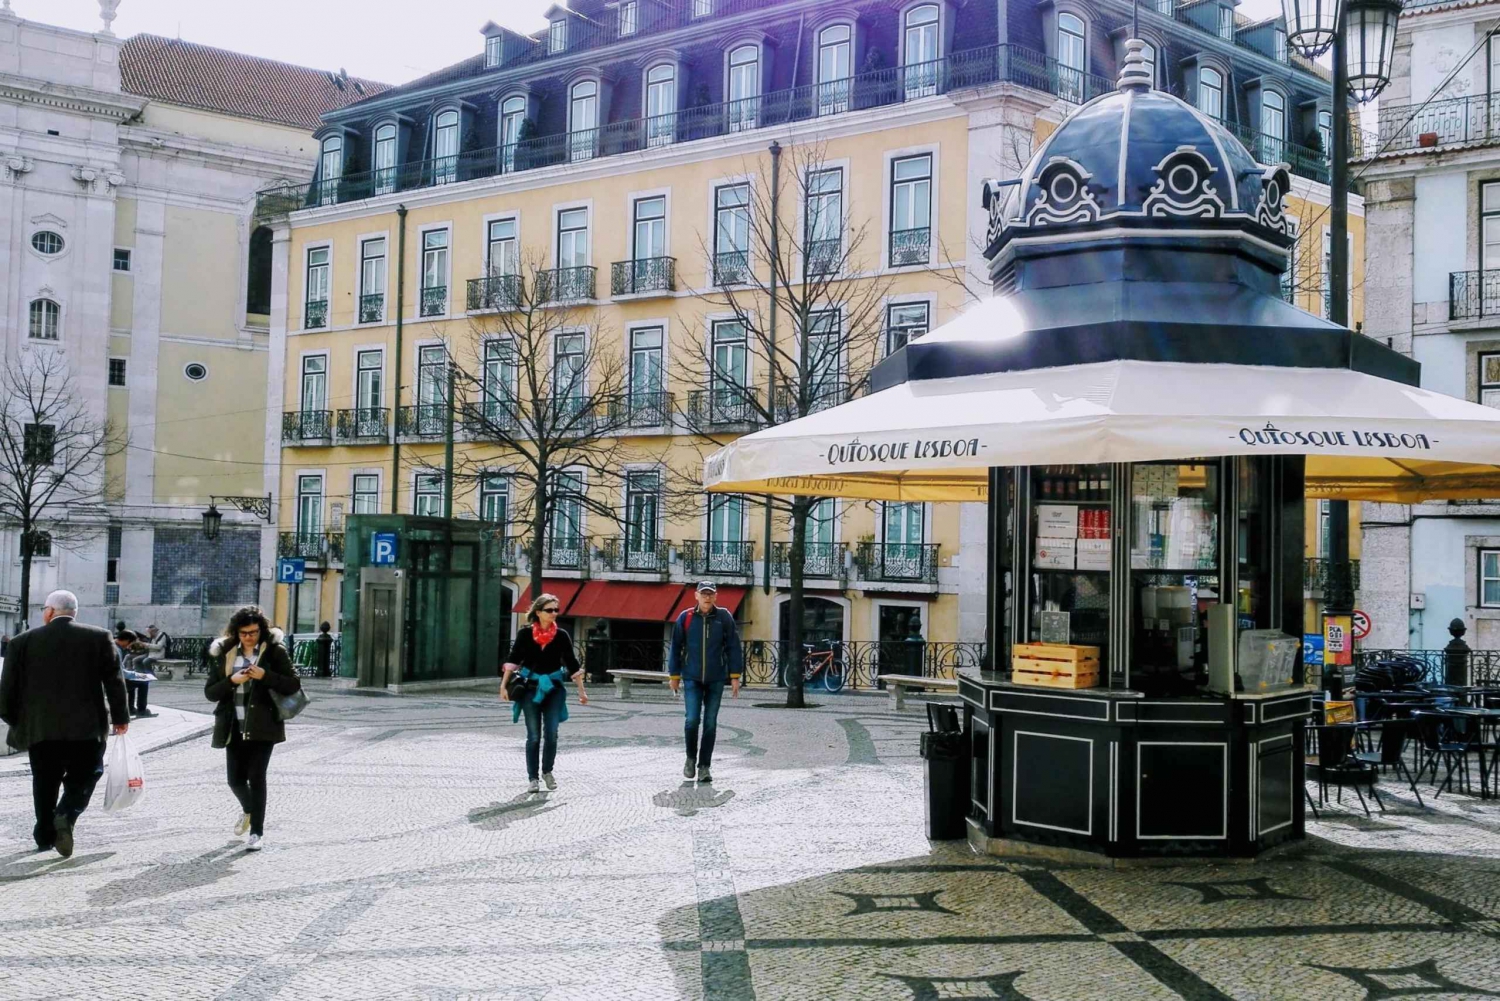 Lisbon: Layover Tour with Airport Pickup and Drop-Off